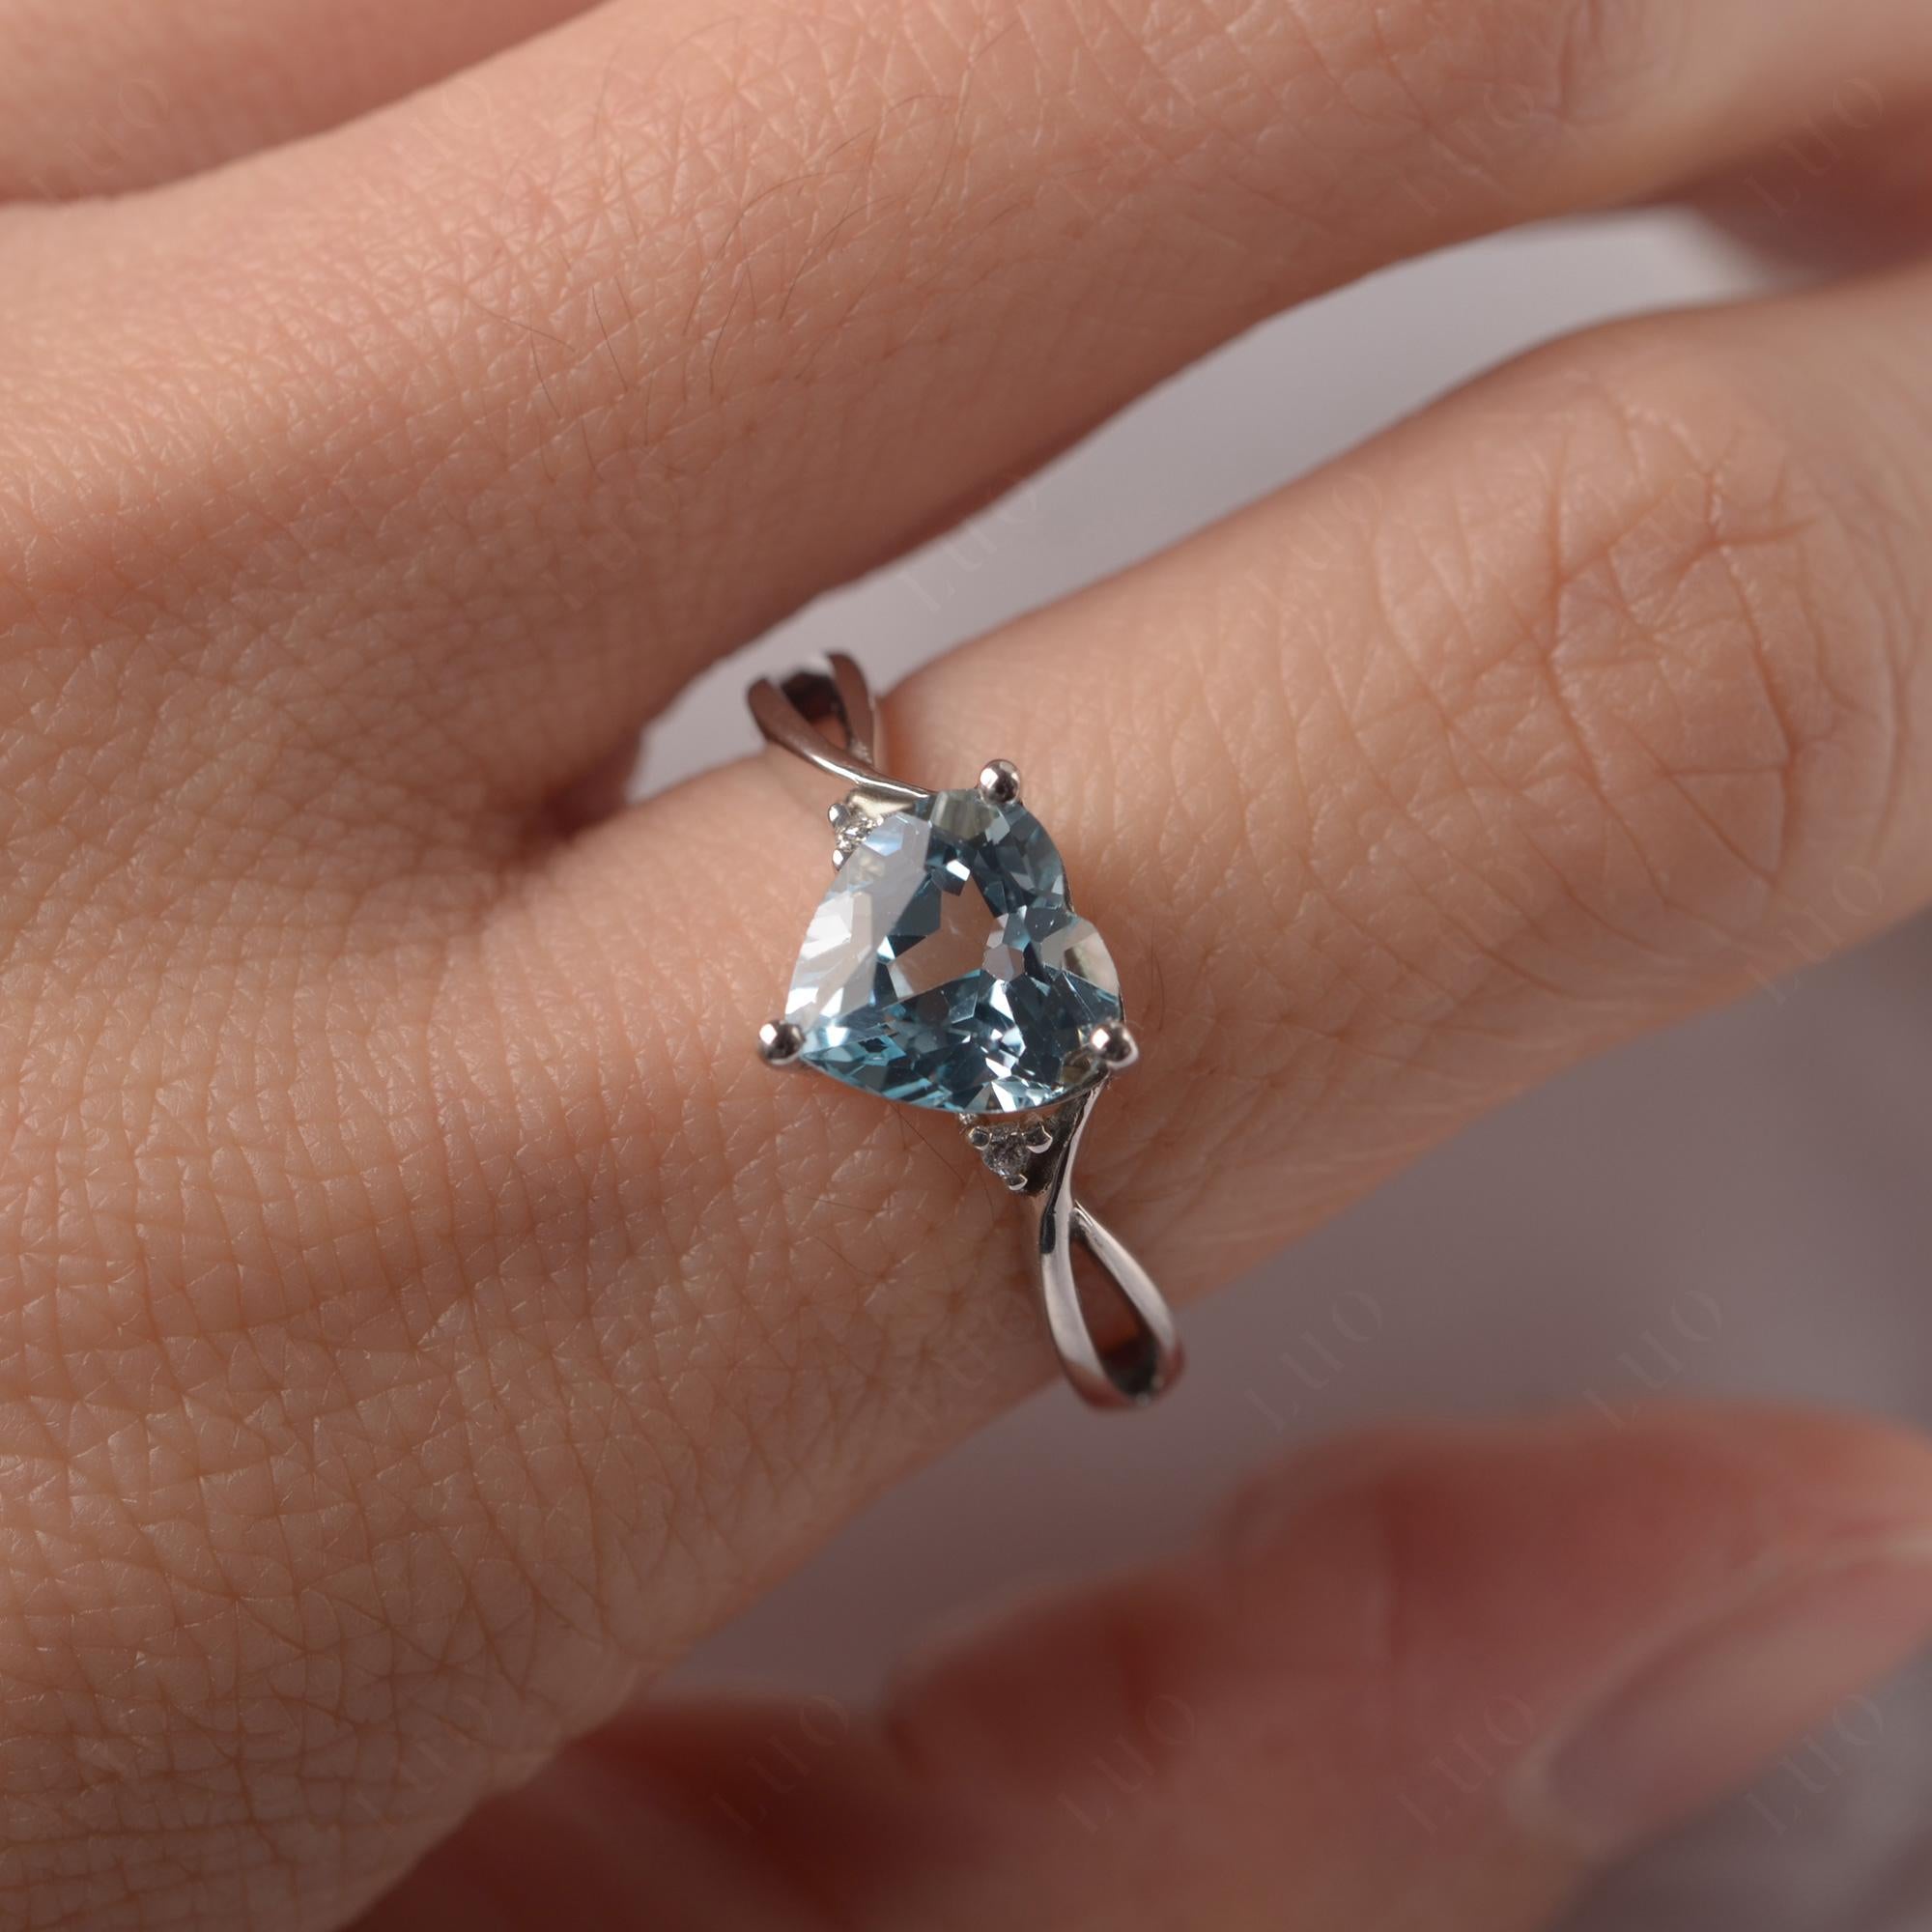 Heart Cut Sky Blue Topaz Engagement Ring - LUO Jewelry